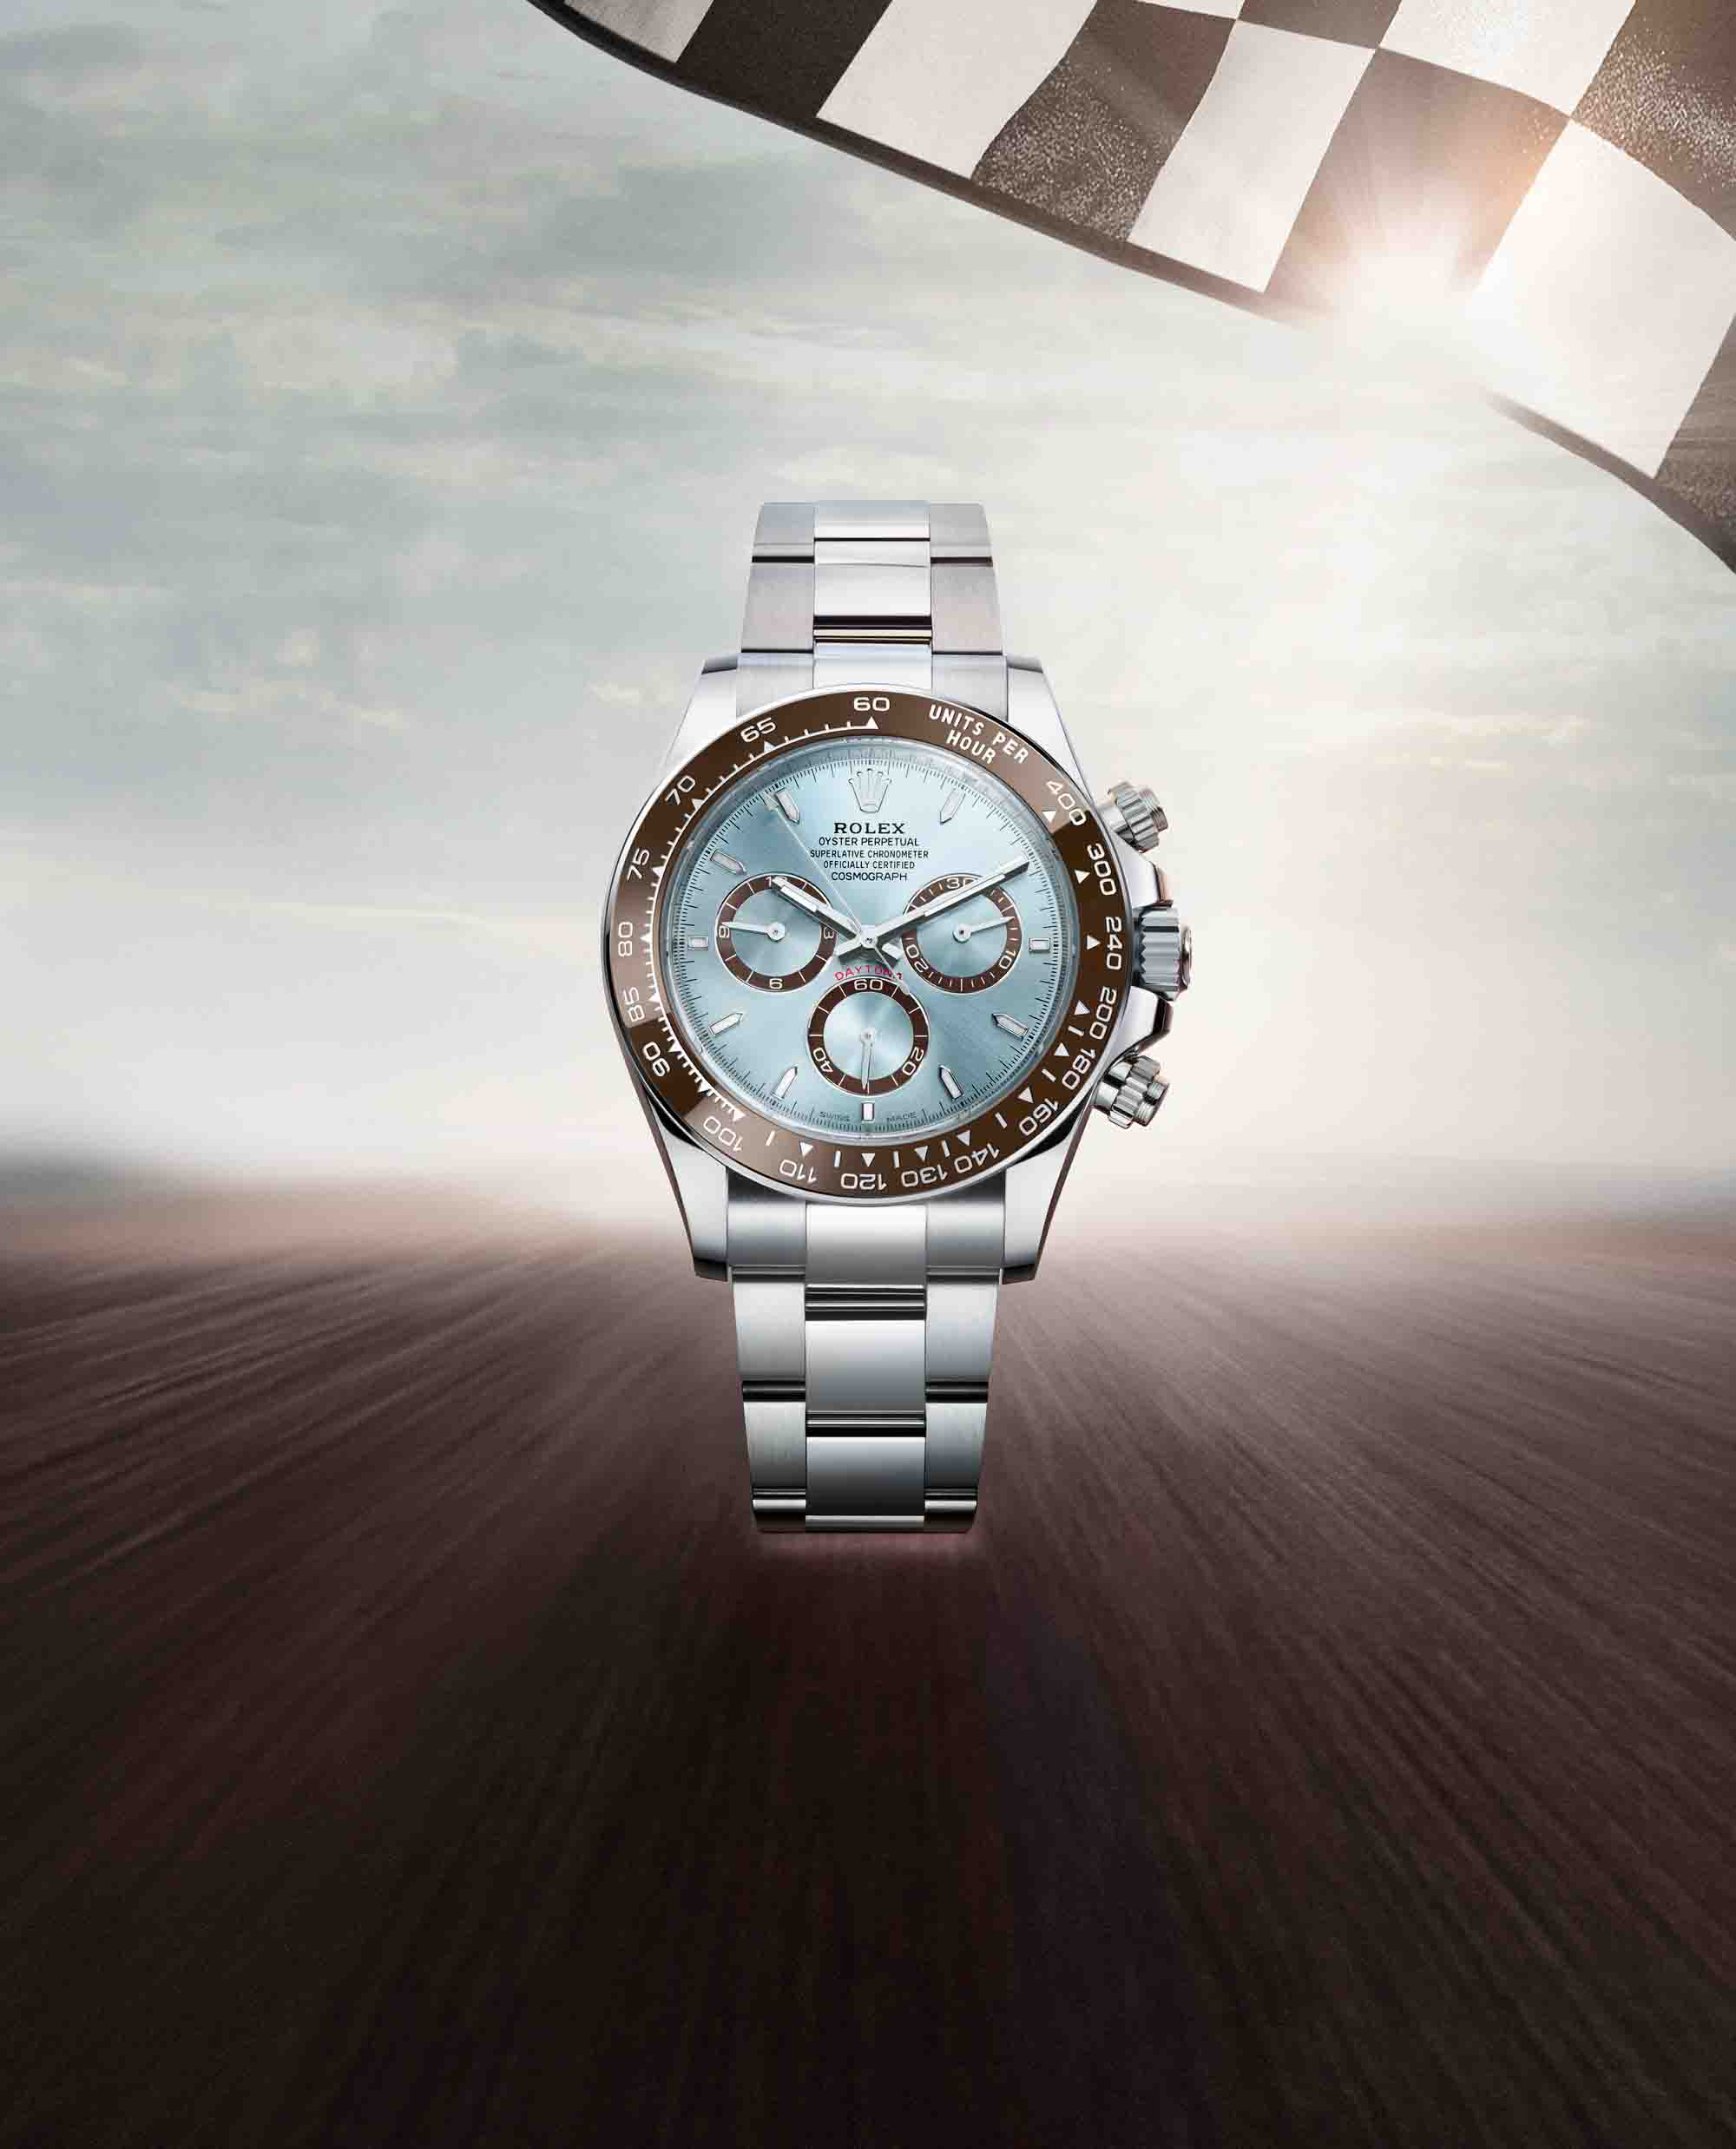 efterligne grill rynker Rolex Unveils New Cosmograph Daytona Watches To Celebrate The Collection's  60th Anniversary | aBlogtoWatch